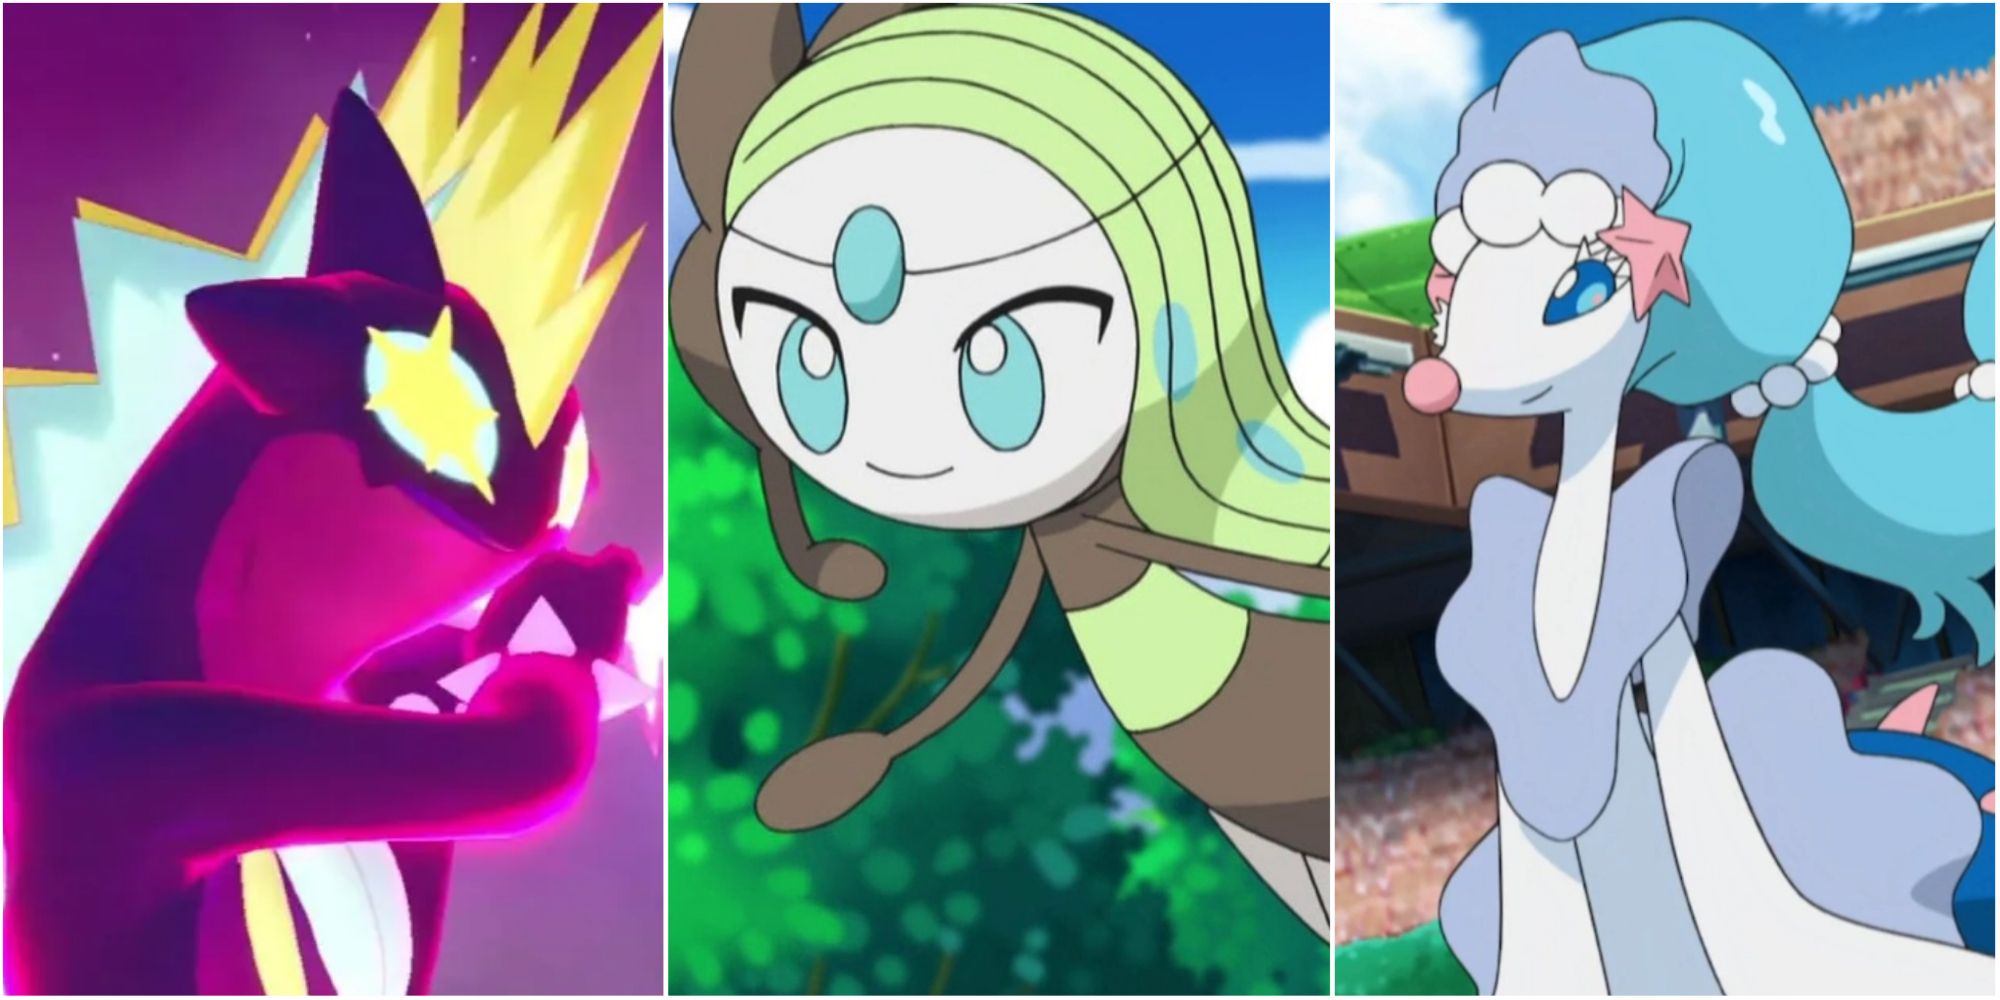 Which Pokémon is associated with music? - Quora